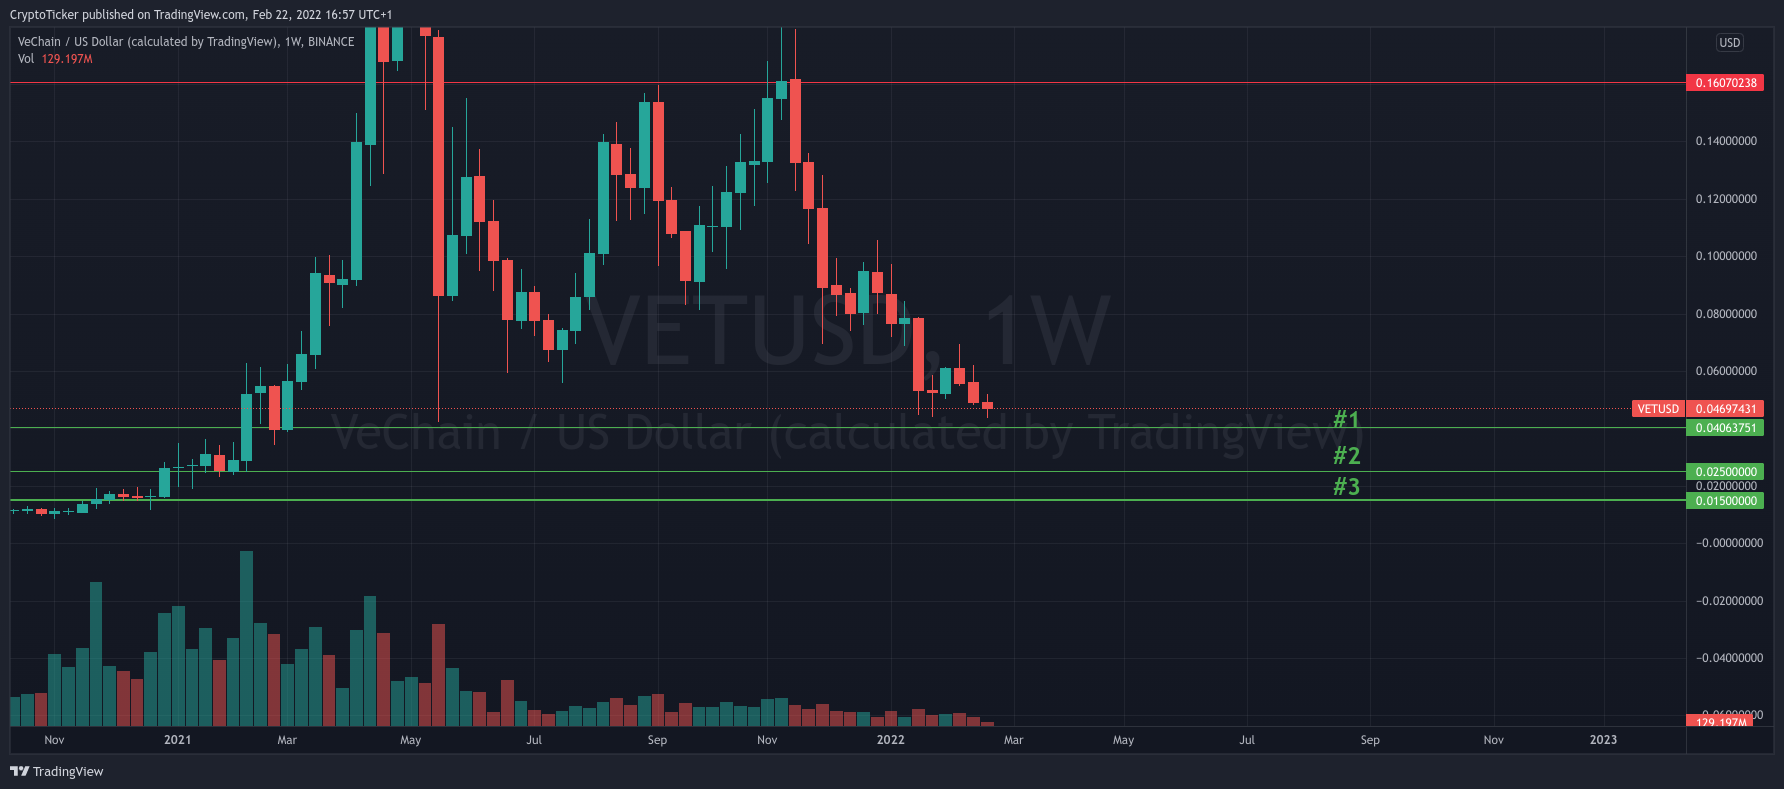 VET/USD 1-week chart showing the next support levels of VET coin prices